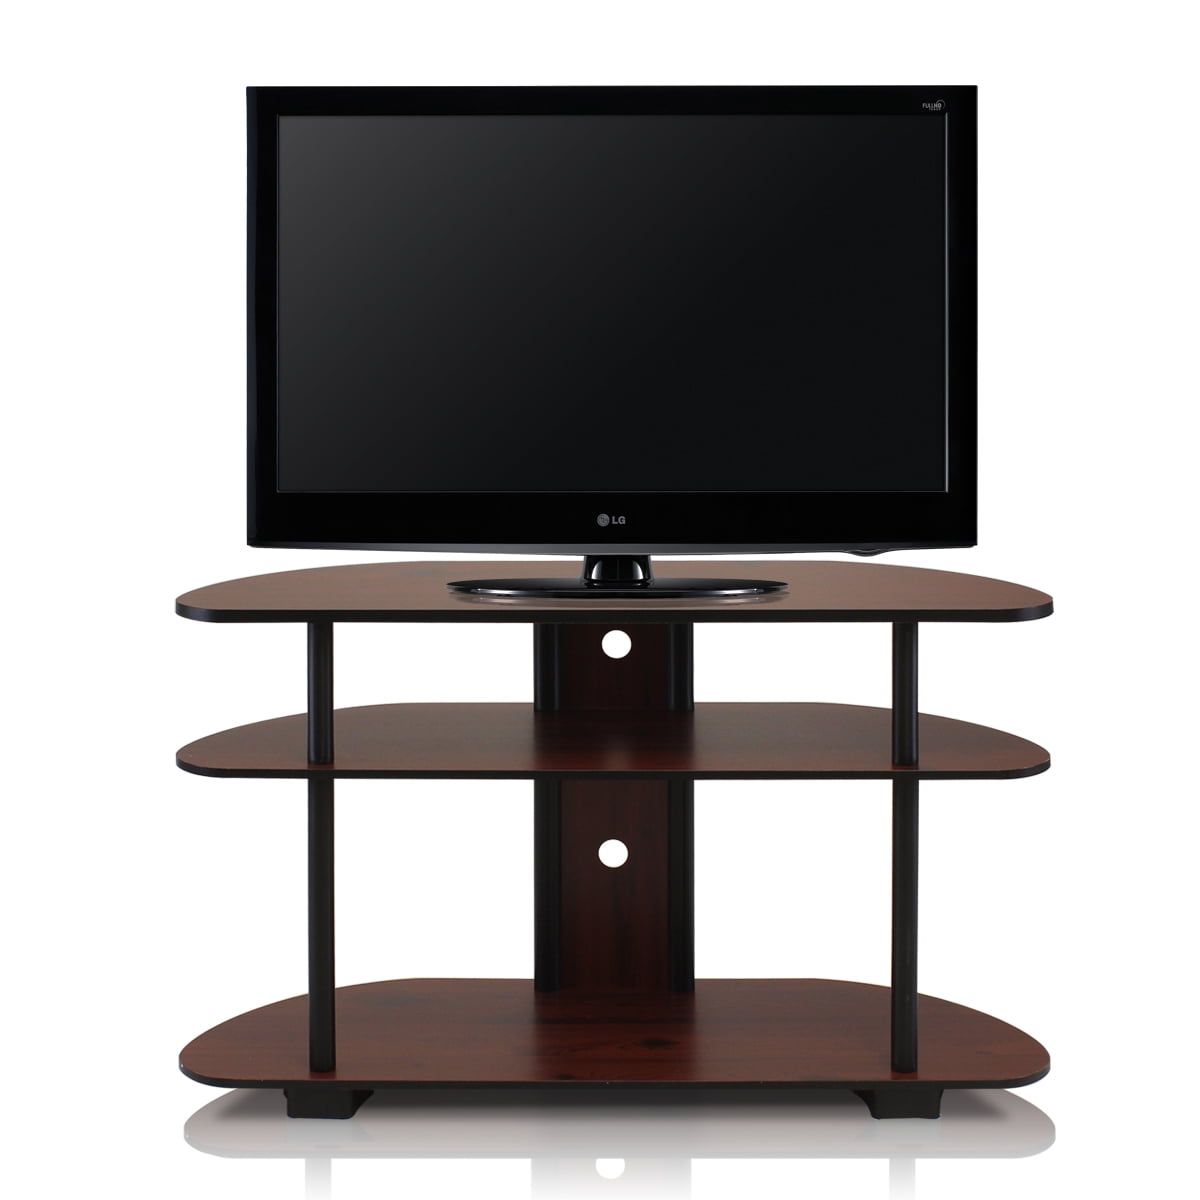 Turn N Tube 3 Tier Tv Stand For Tvs Up To 43 , Multiple Colors Regarding Tier Stands For Tvs (Gallery 12 of 20)